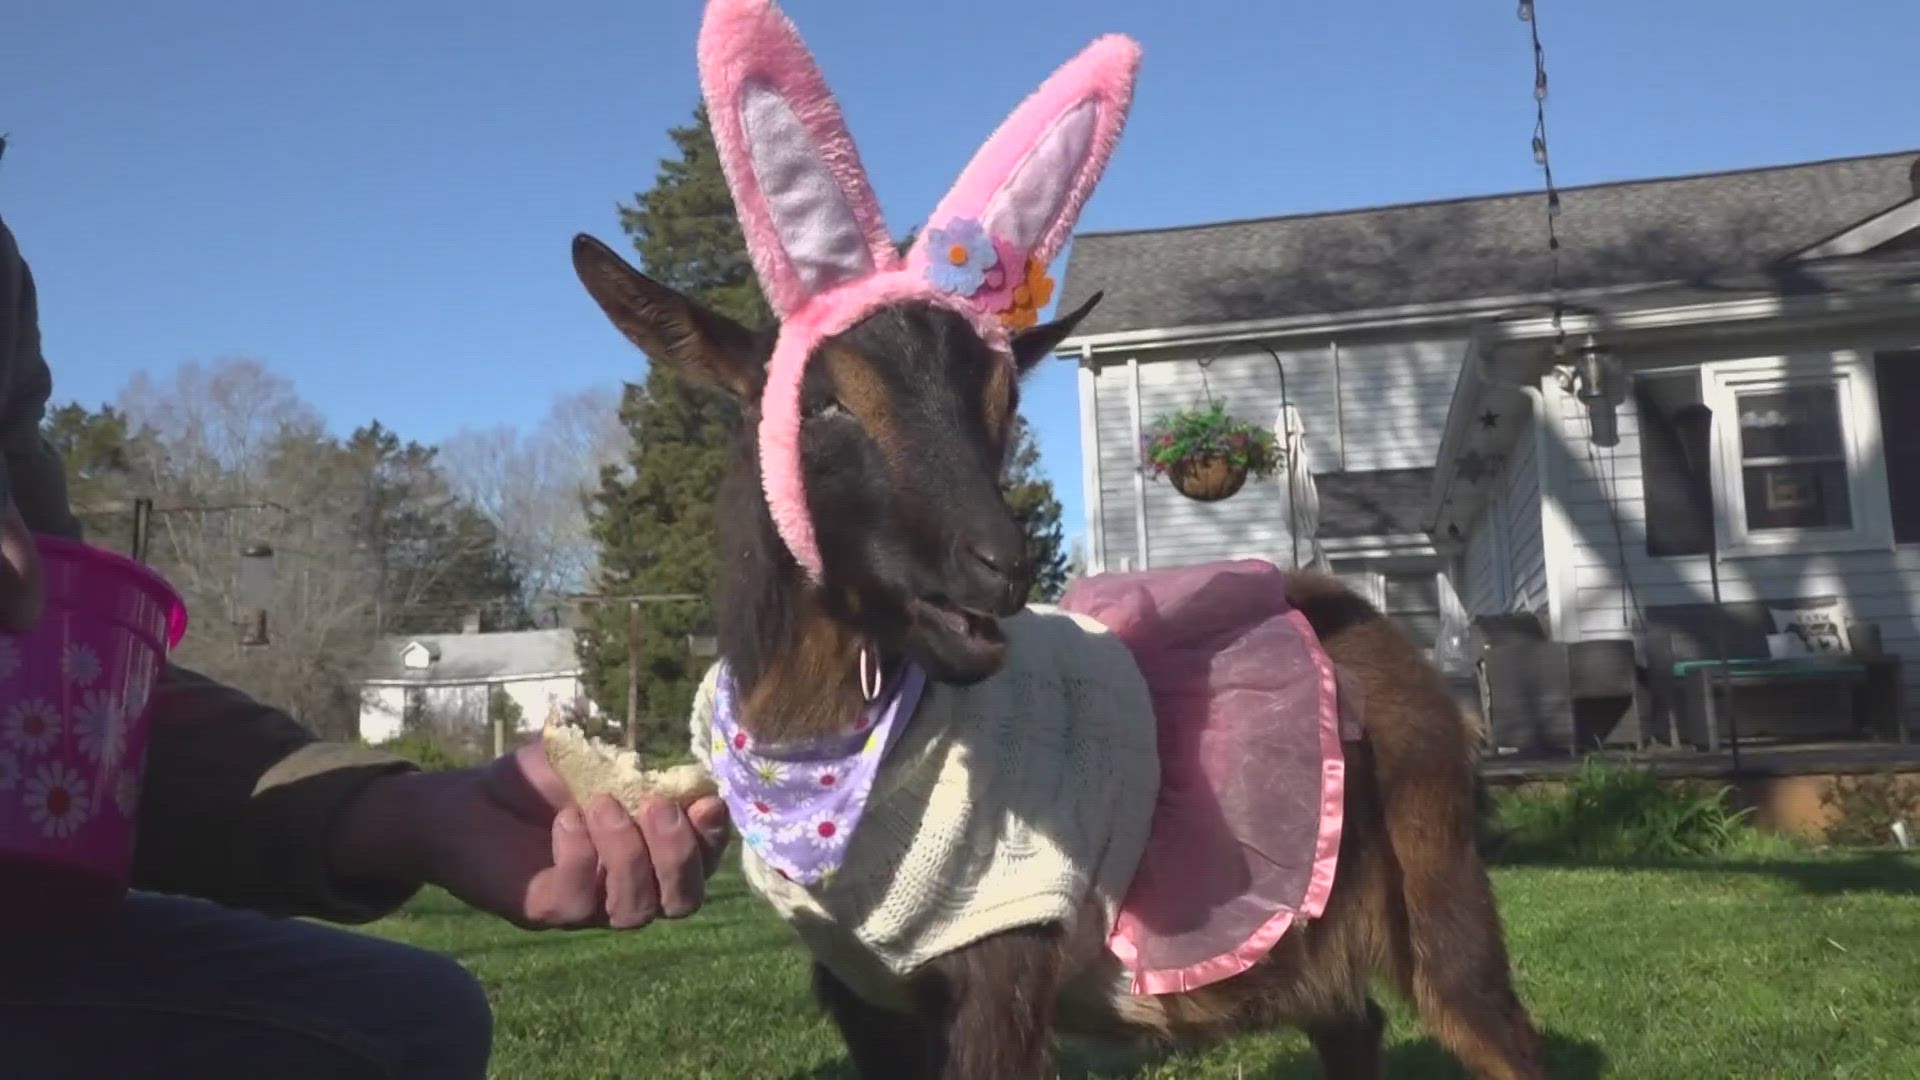 A Nigerian dwarf goat from the Triad competed to be the next Cadbury bunny.